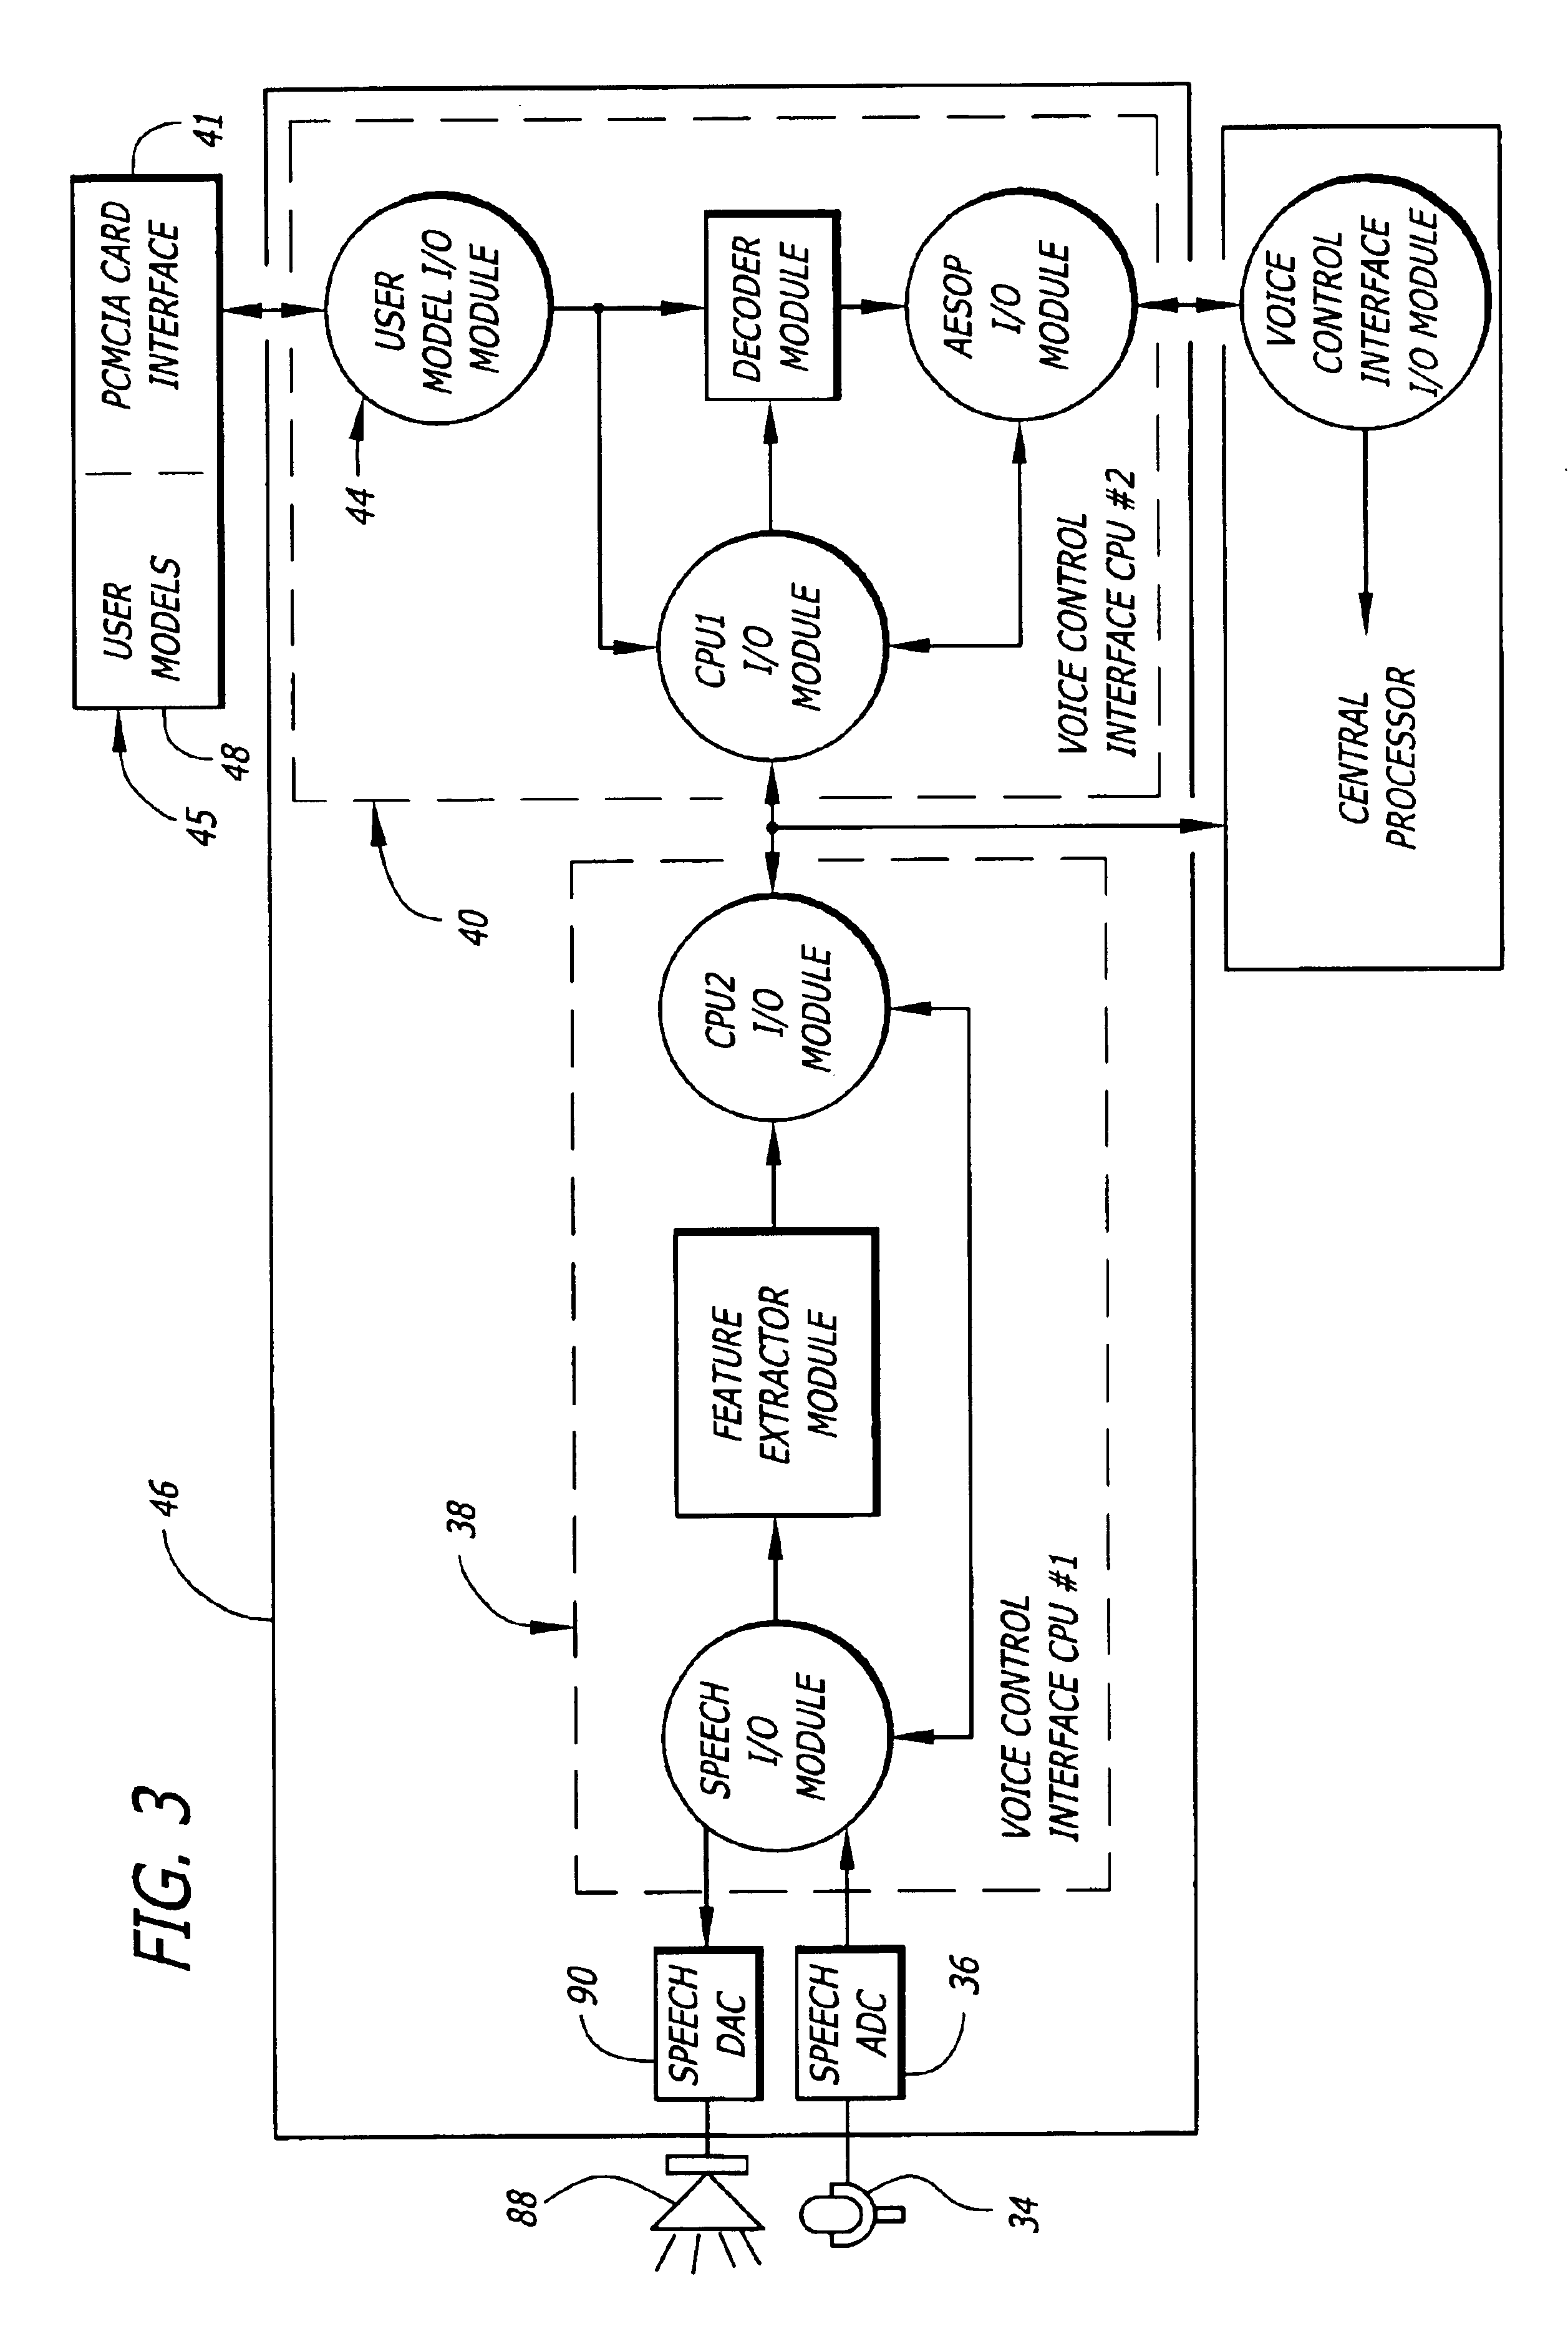 General purpose distributed operating room control system